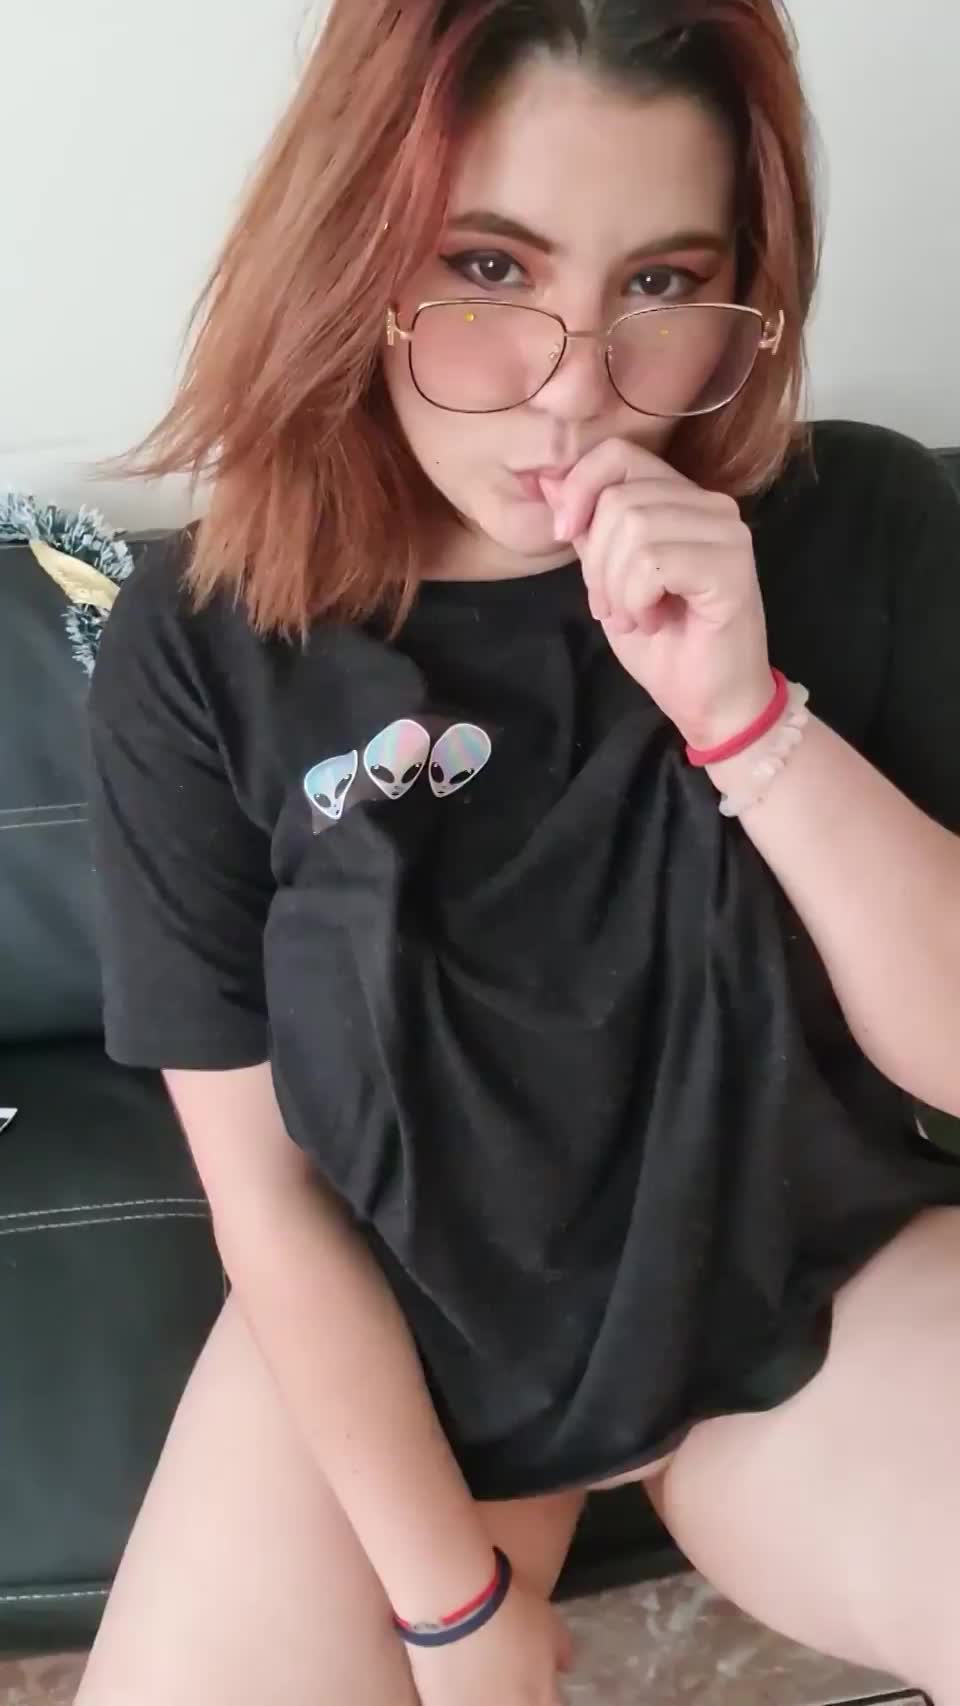 Do you like girls with glasses? OC : video clip